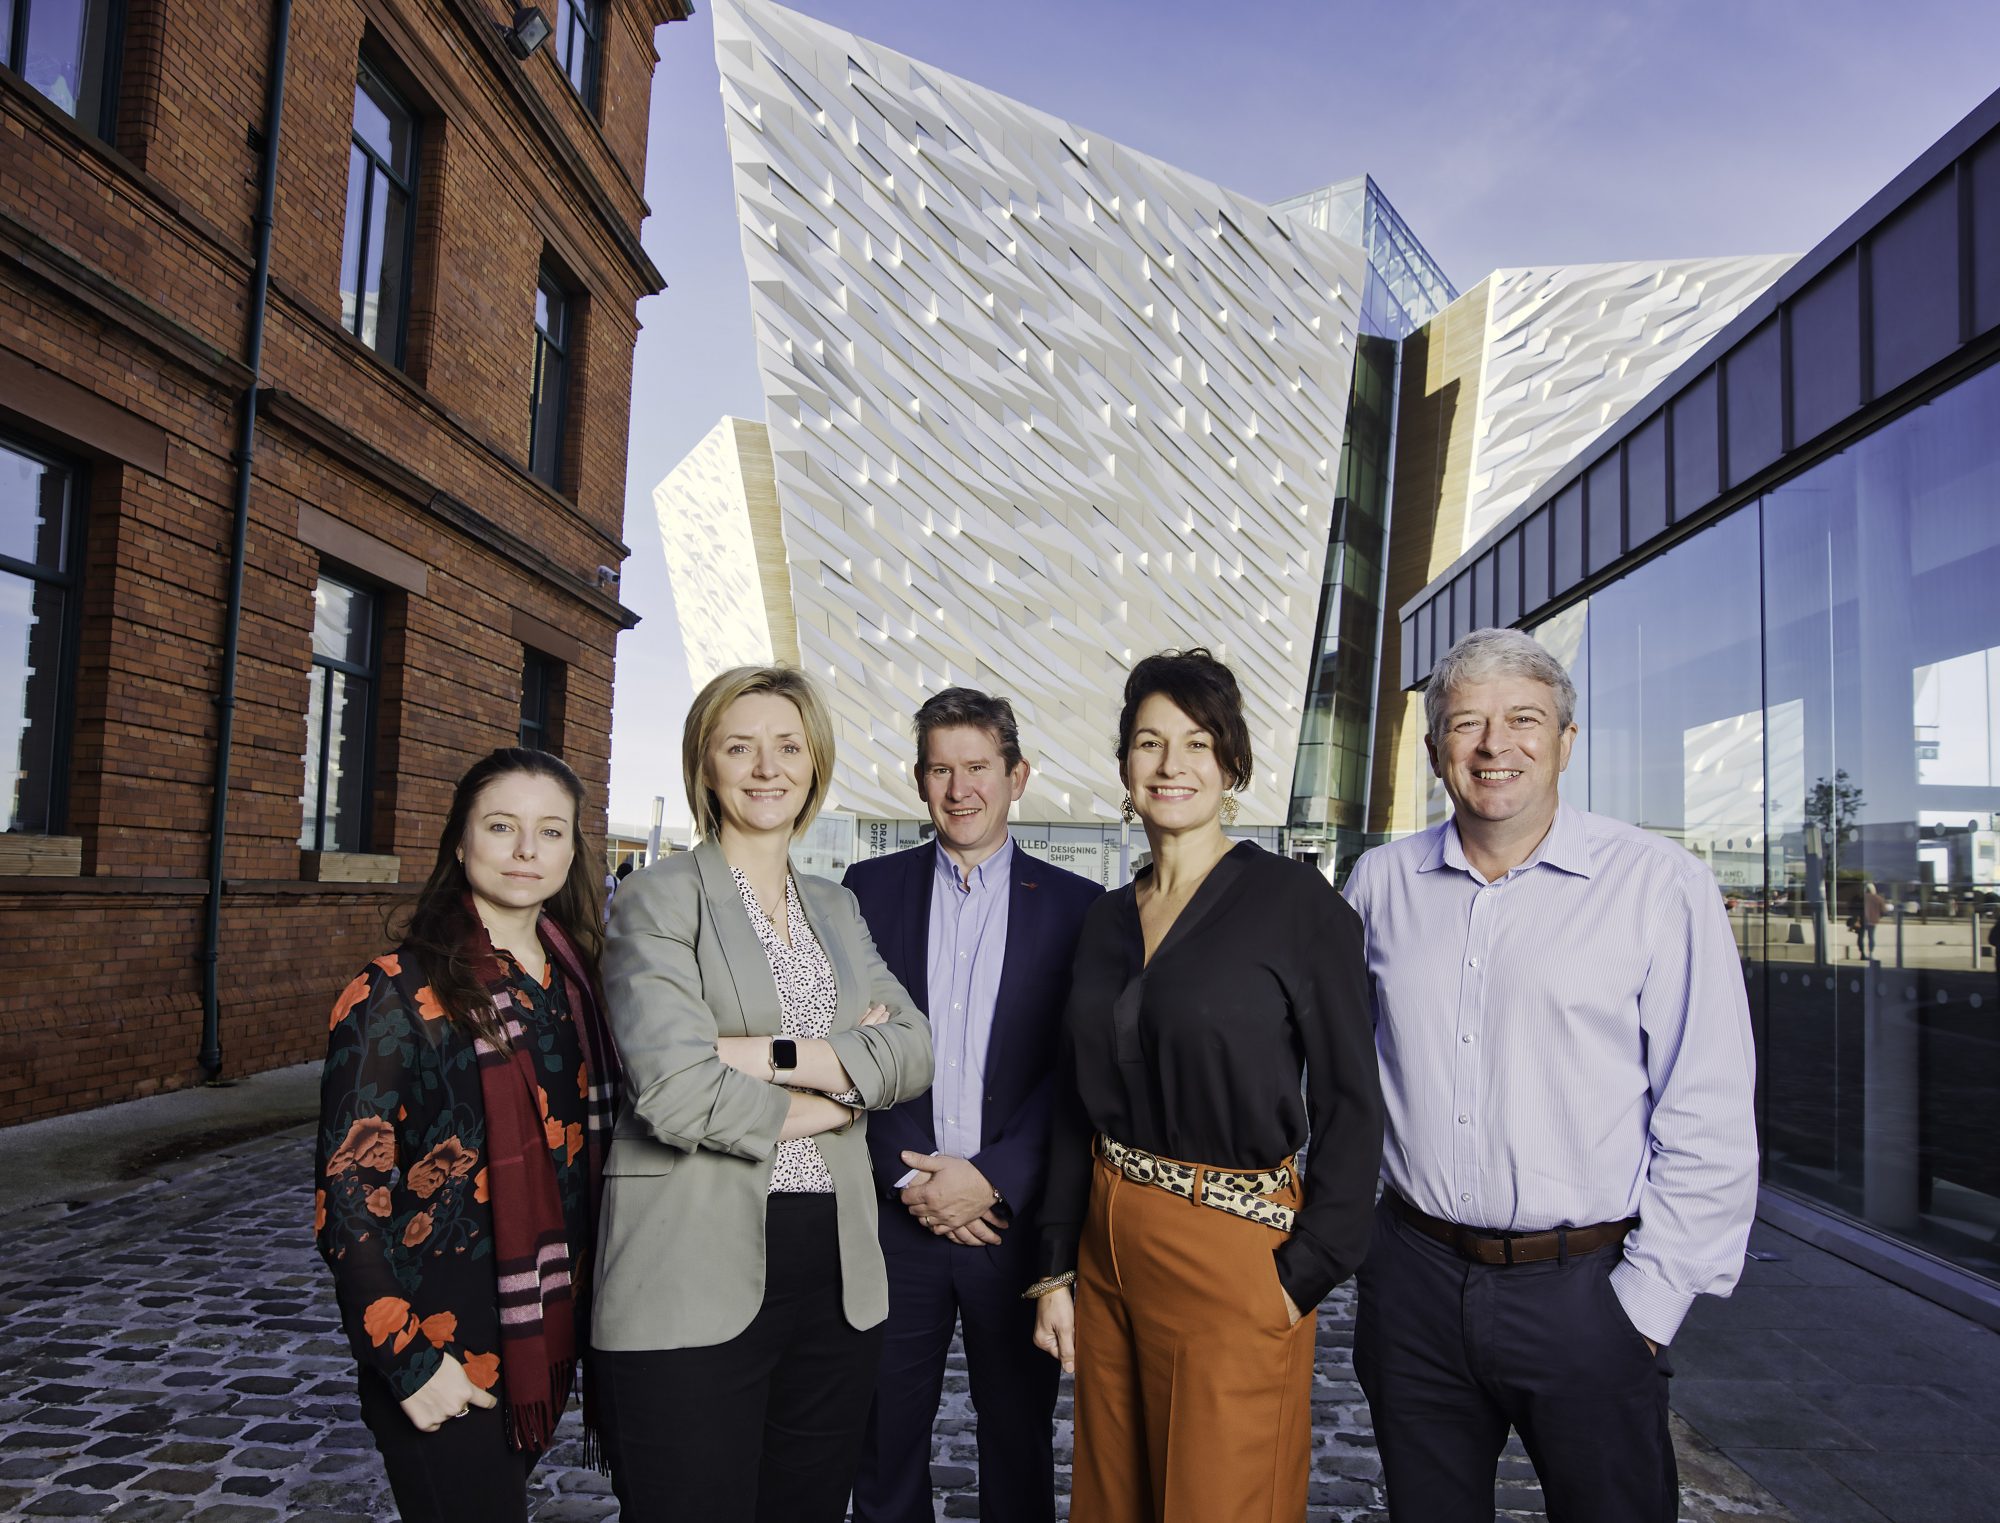 Catalyst’s Inbound Investors hosts more than 60 investors from venture capital firms from the UK and Ireland seeking deals with NI companies